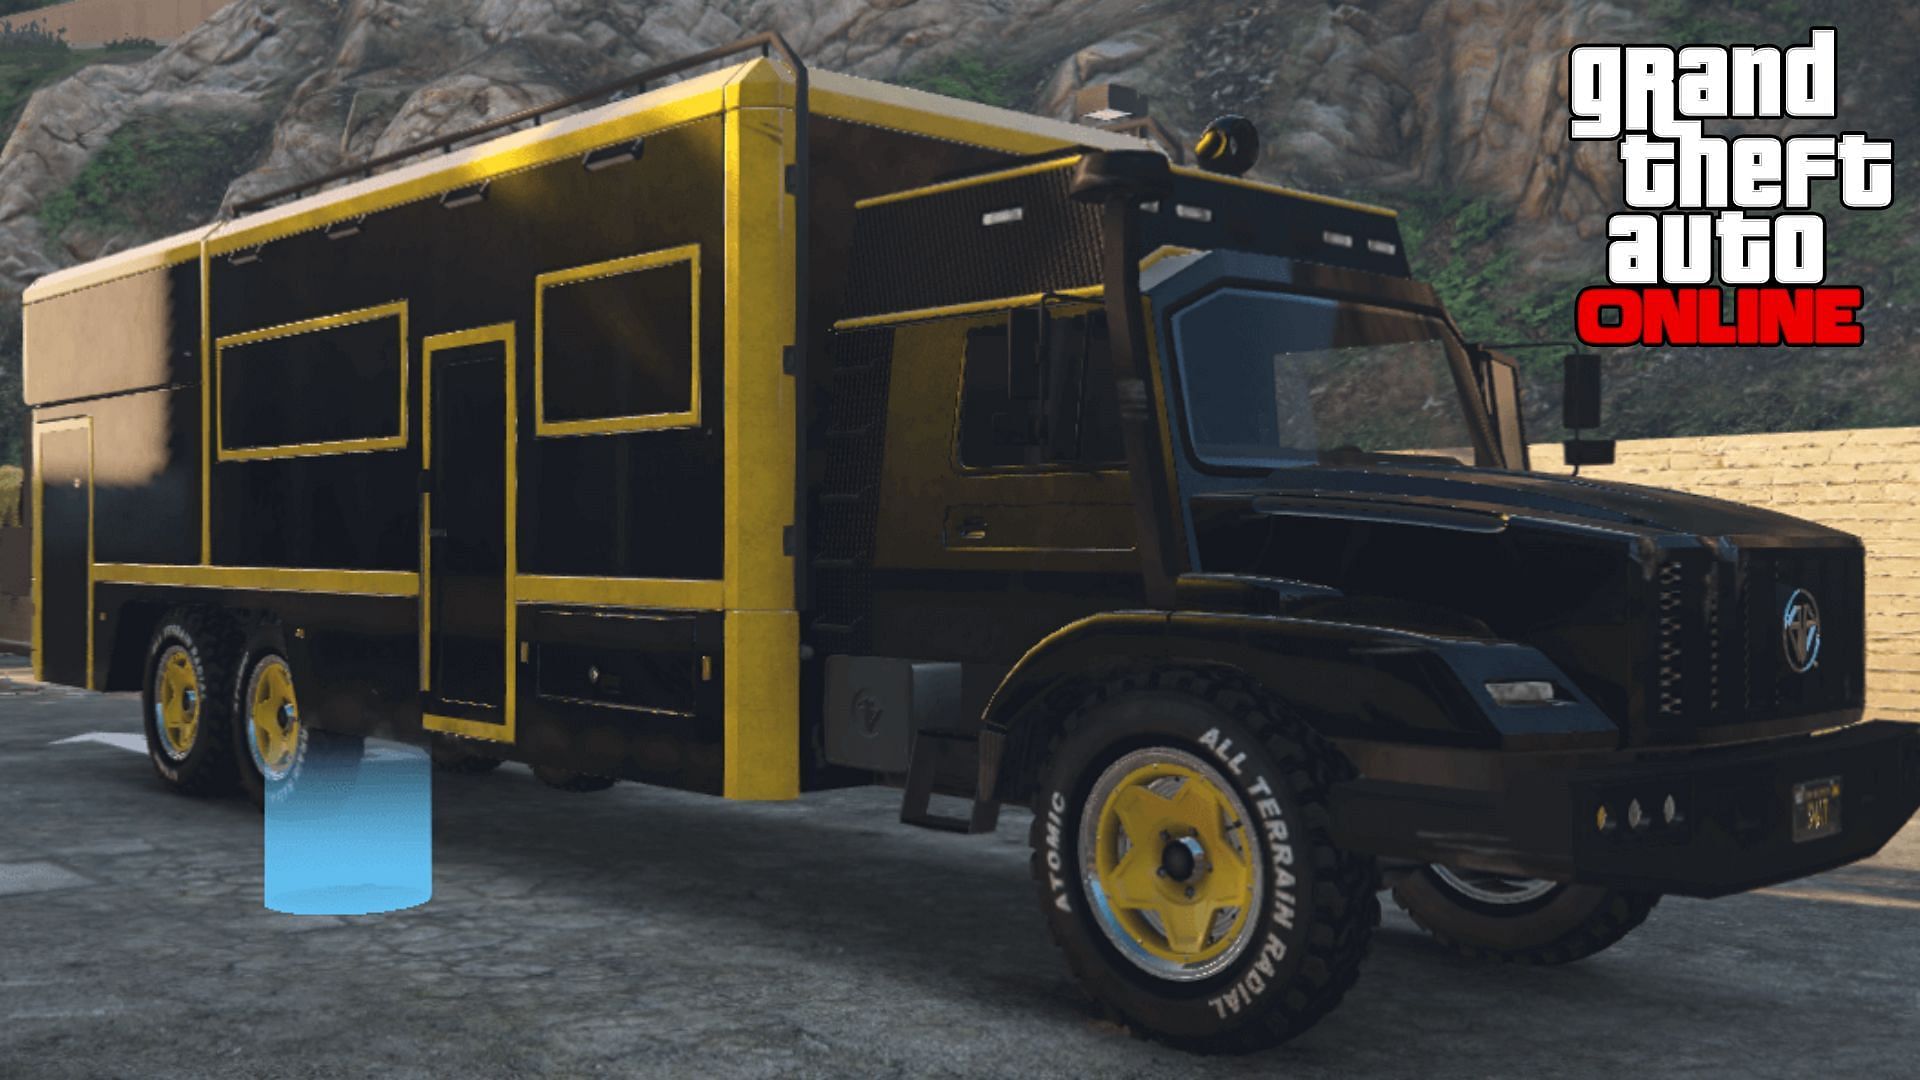 A fully upgraded Benefactor Terrorbyte in GTA Online (Image via GTA Base/cgris85)